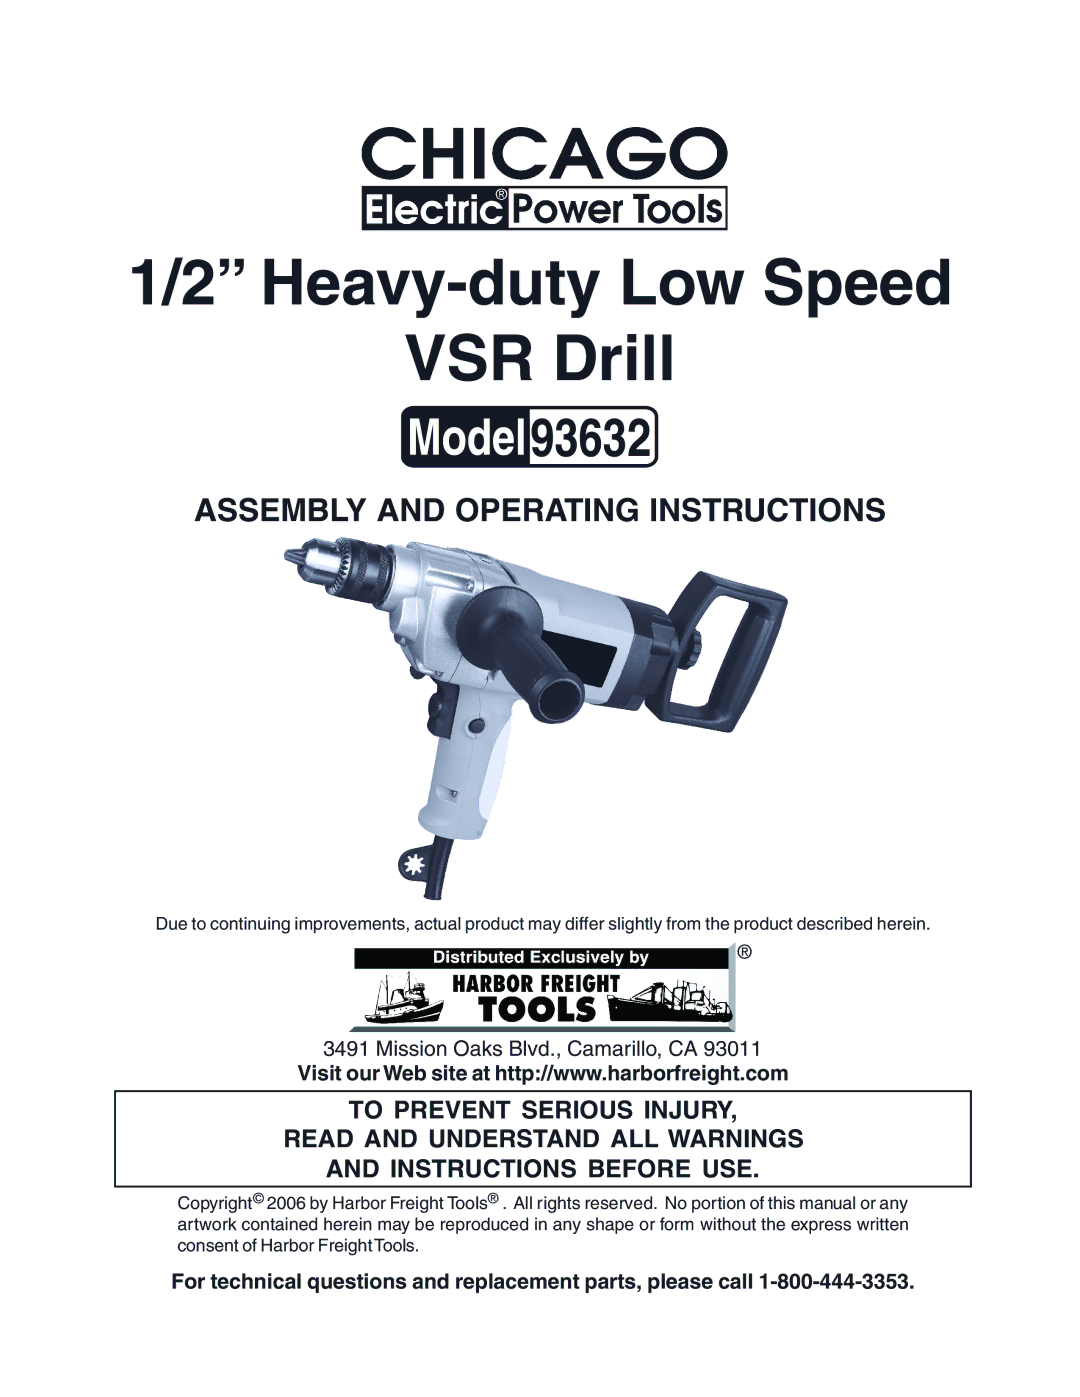 Harbor Freight Tools 93632 operating instructions Heavy-duty Low Speed VSR Drill, Assembly and Operating Instructions 